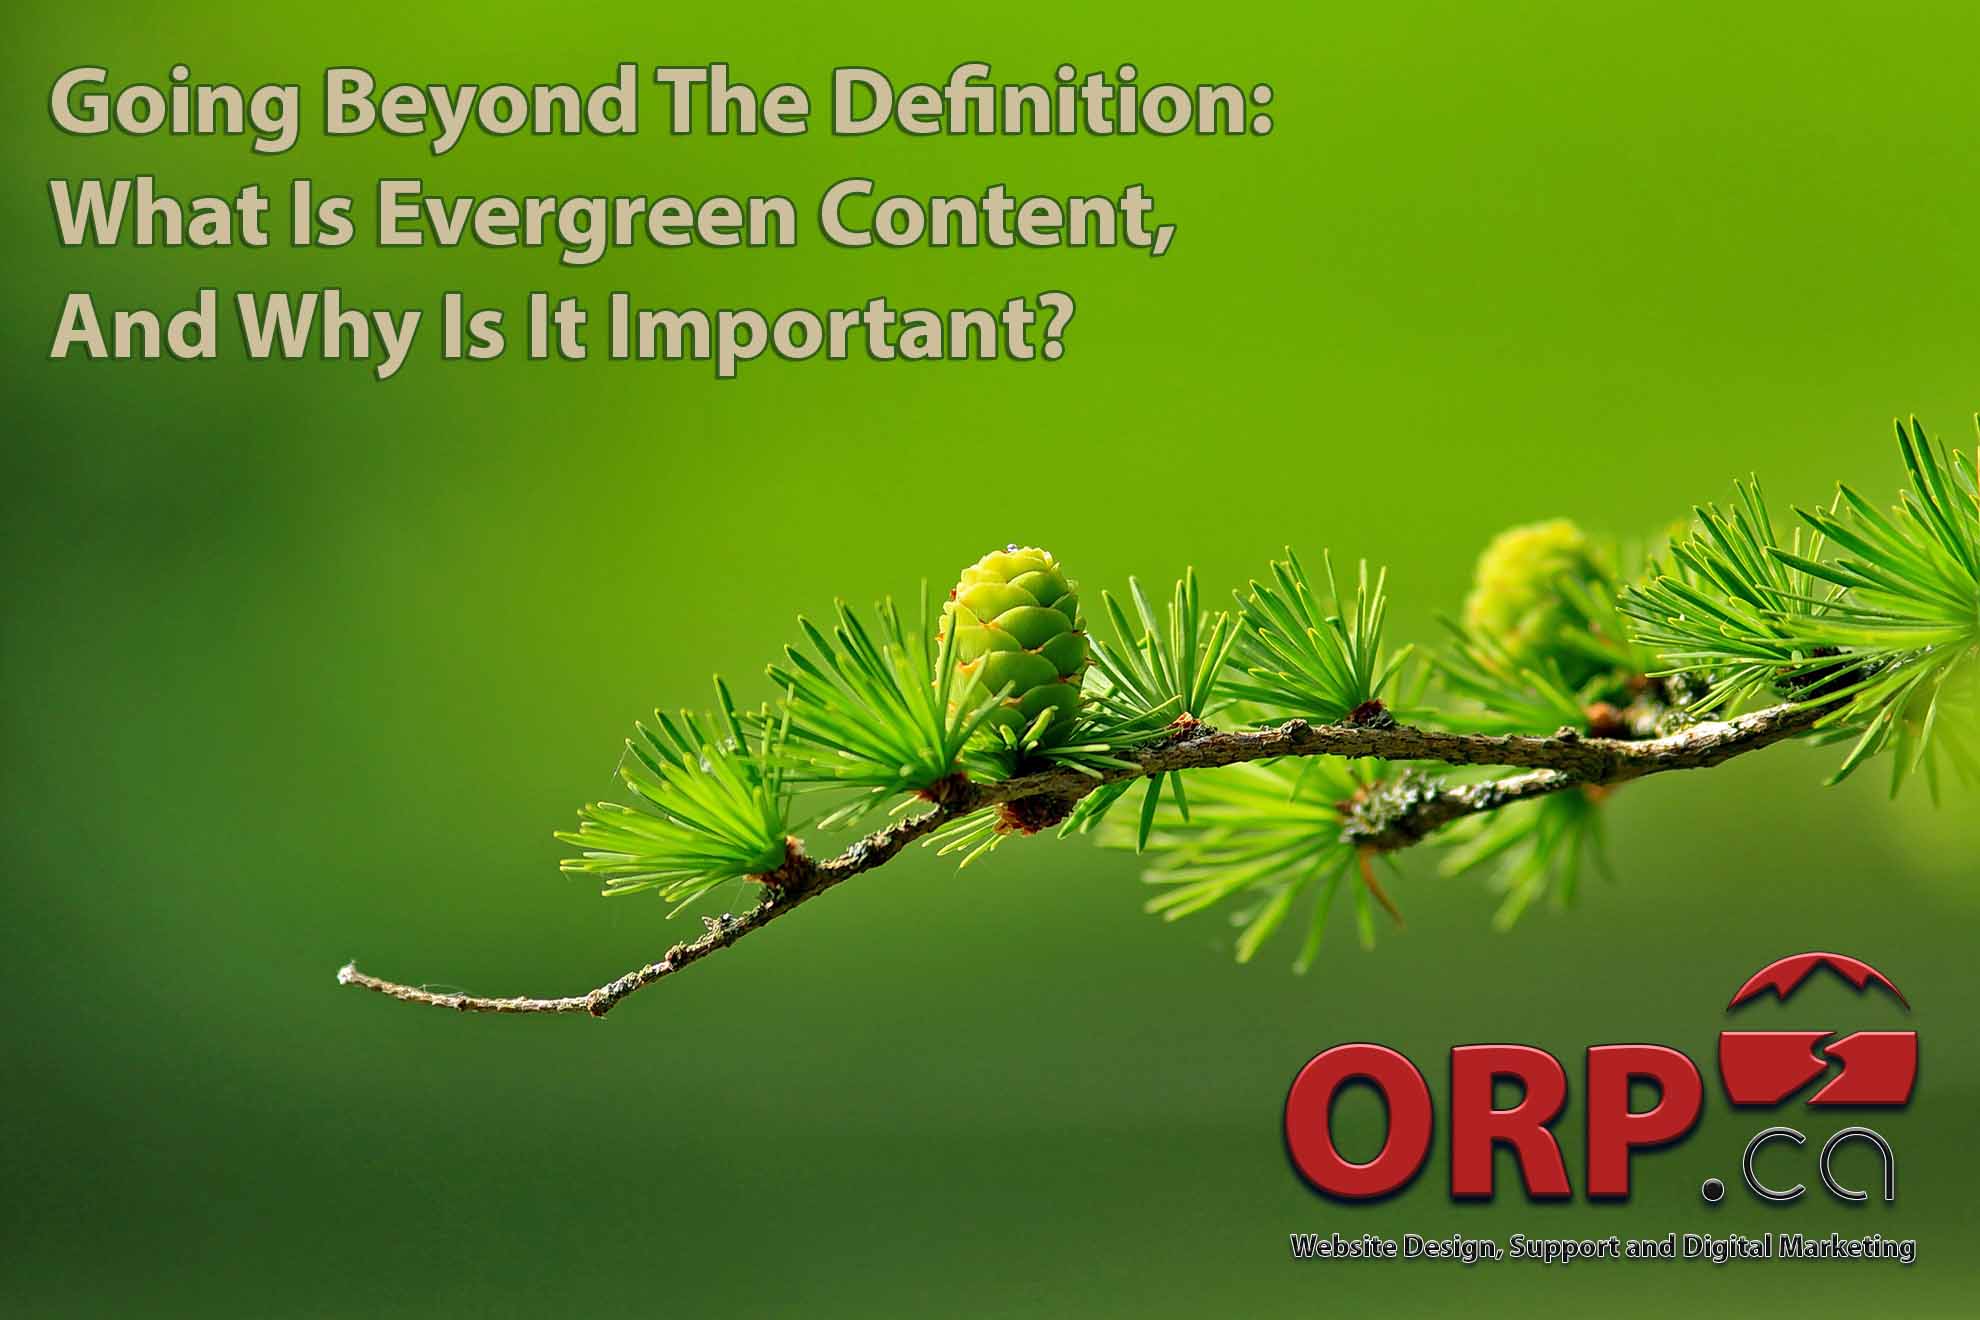 Going Beyond The Definition What Is Evergreen Content And Why Is It Important - a small business content marketing blog article from ORP.ca - providing website design and development, small business digital marketing and consulting services since 2003